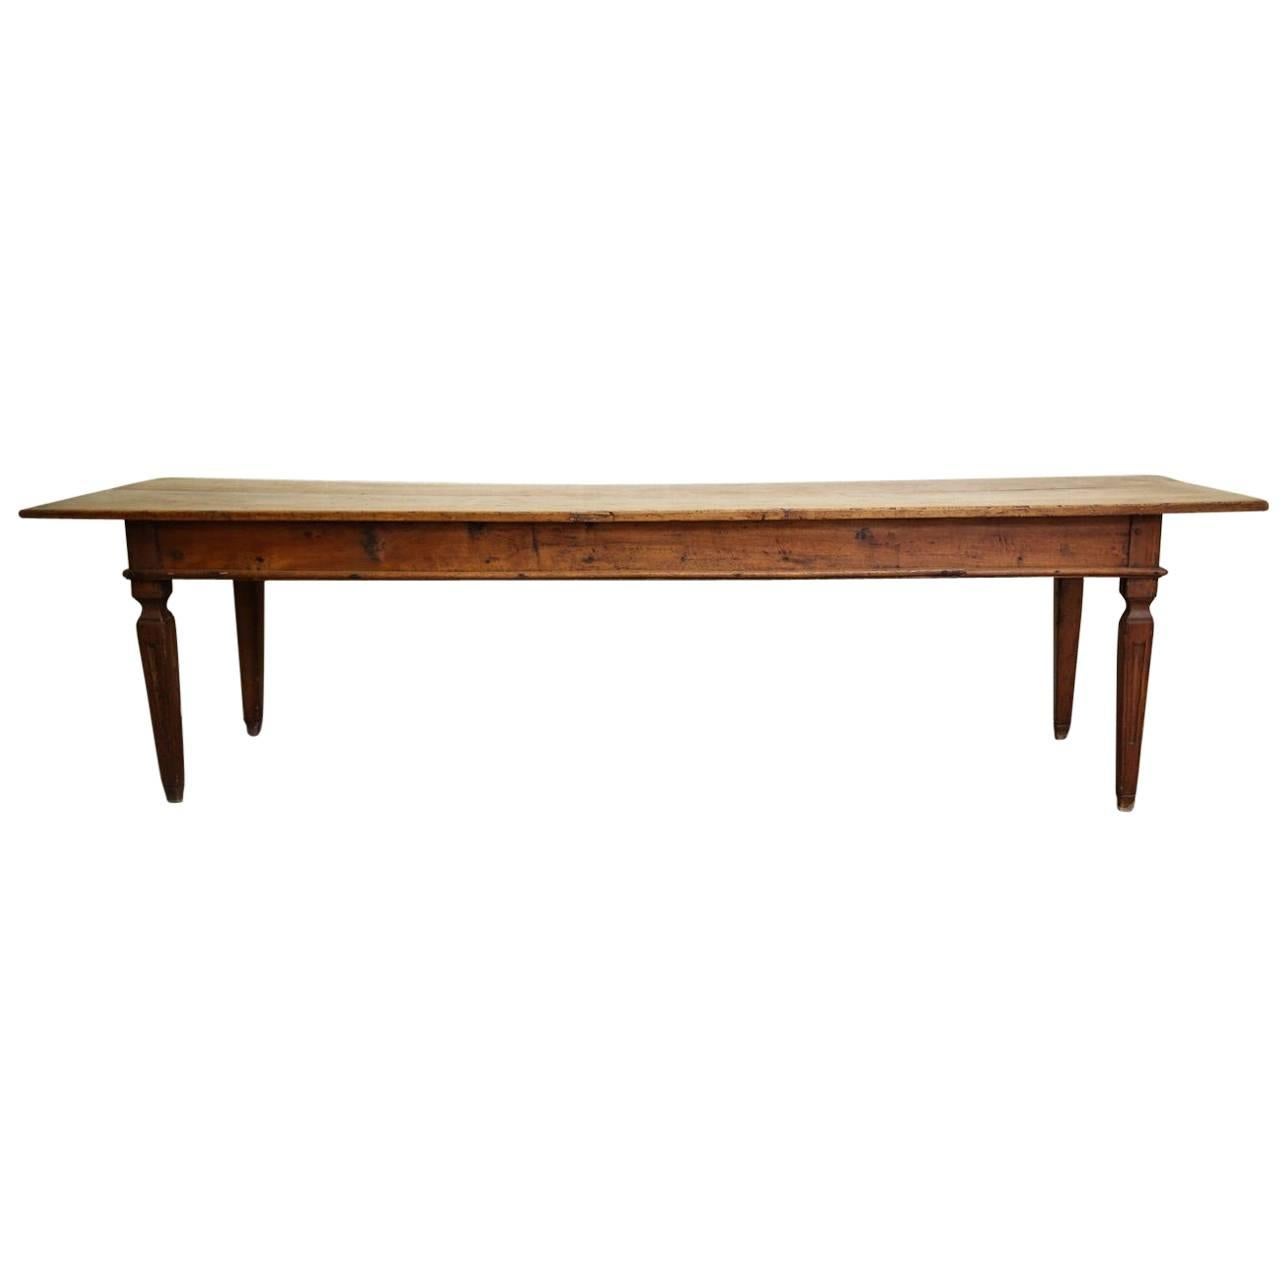 17th-18th Century Italian Long Rustic Dining Table with Three Drawers For Sale